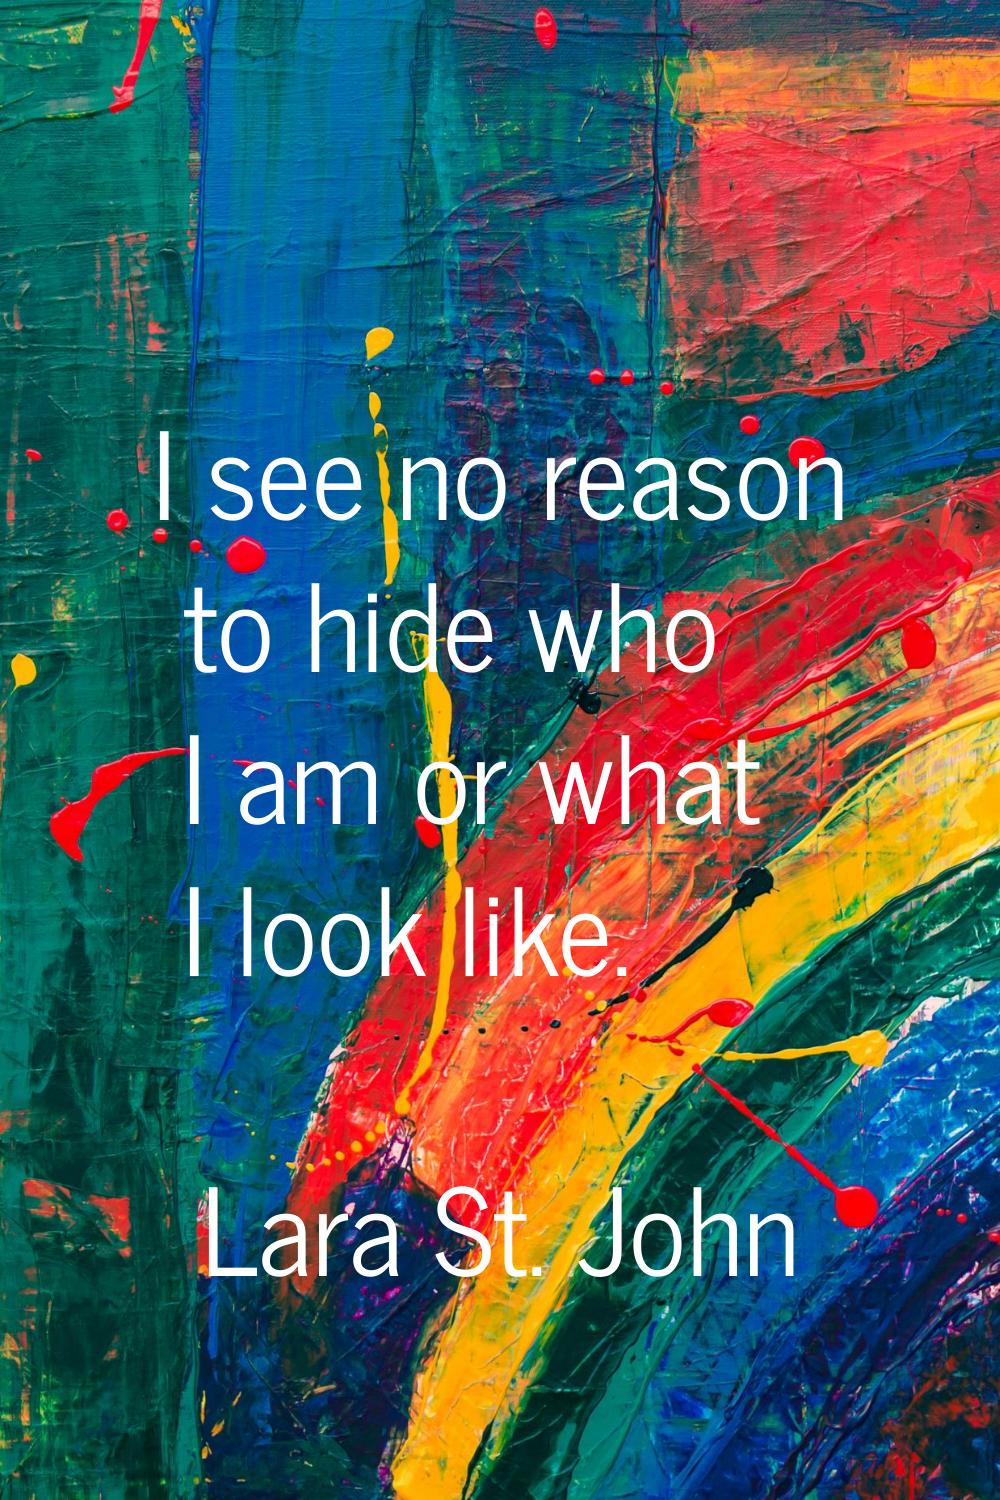 I see no reason to hide who I am or what I look like.